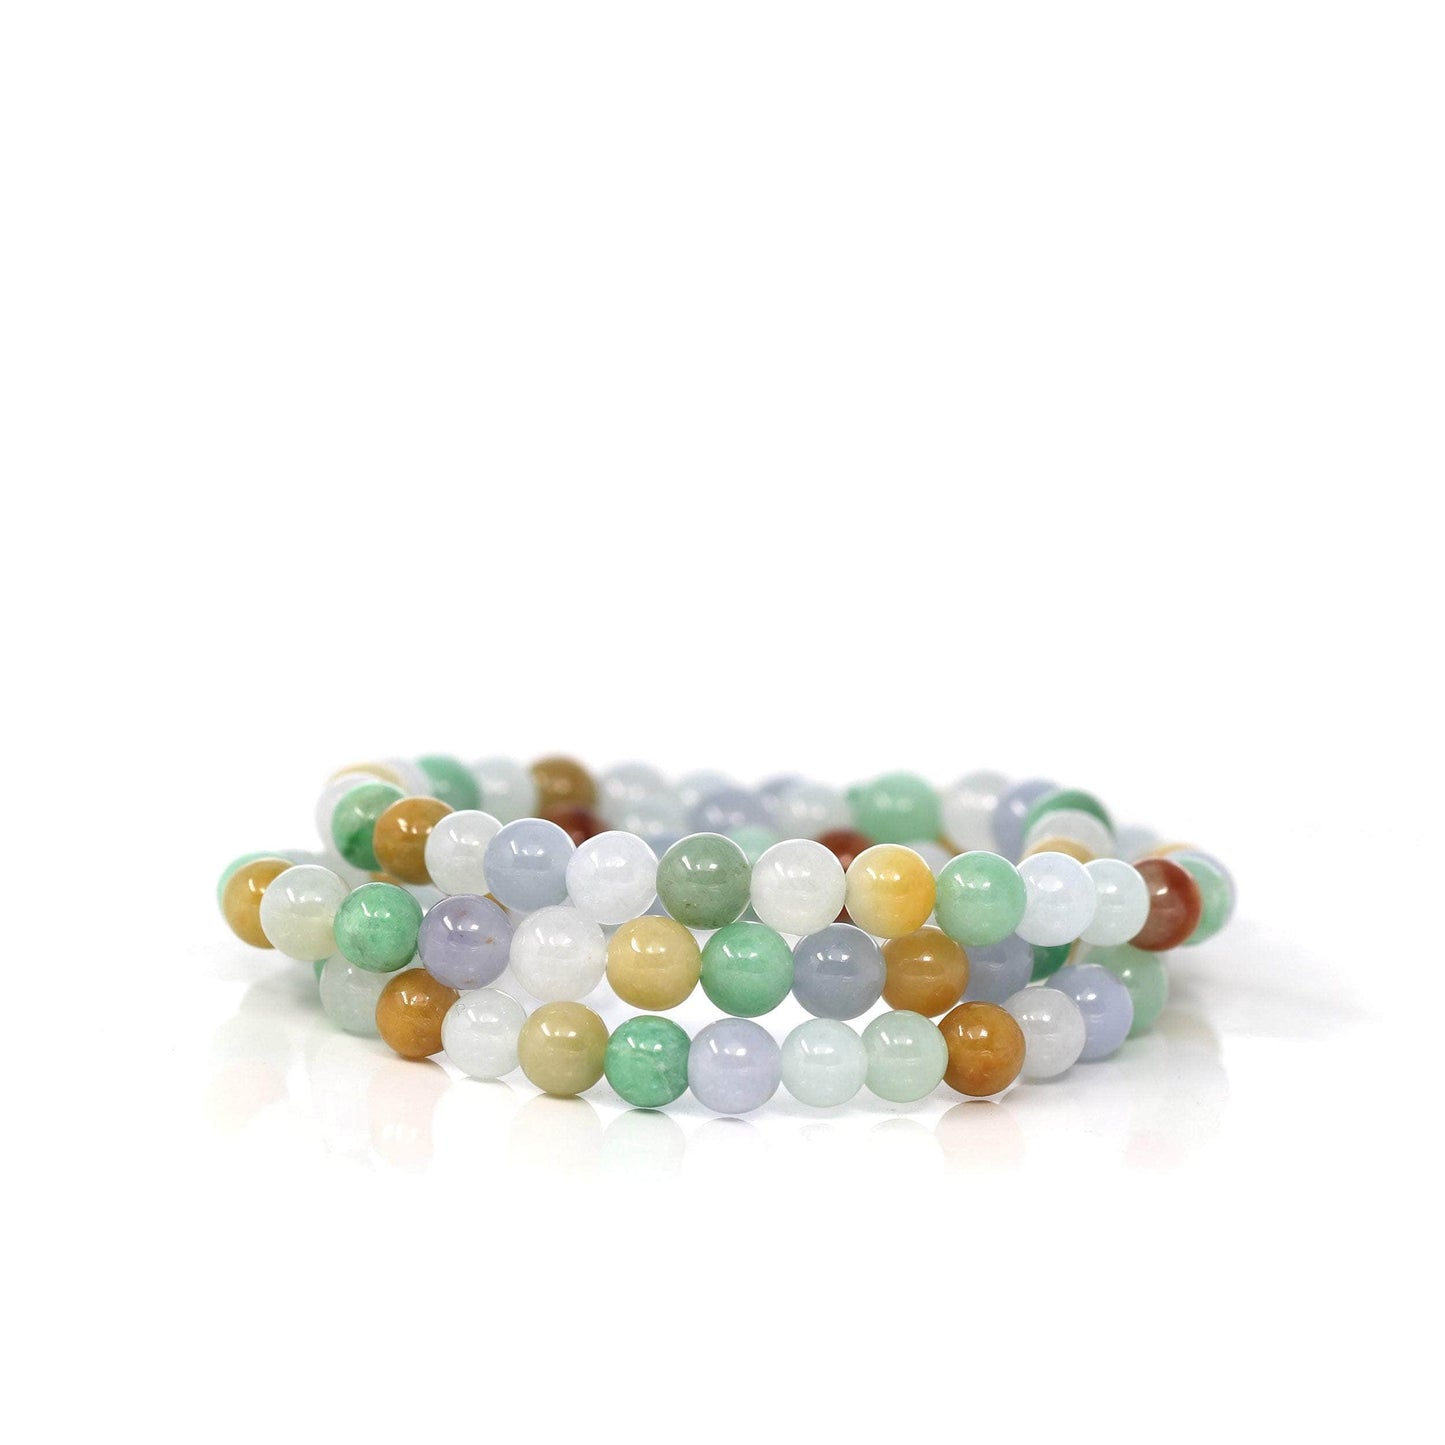 Premium Knotted Green Jade Bead Bracelet in Gold  10MM  CLUB EQUILIBRIUM